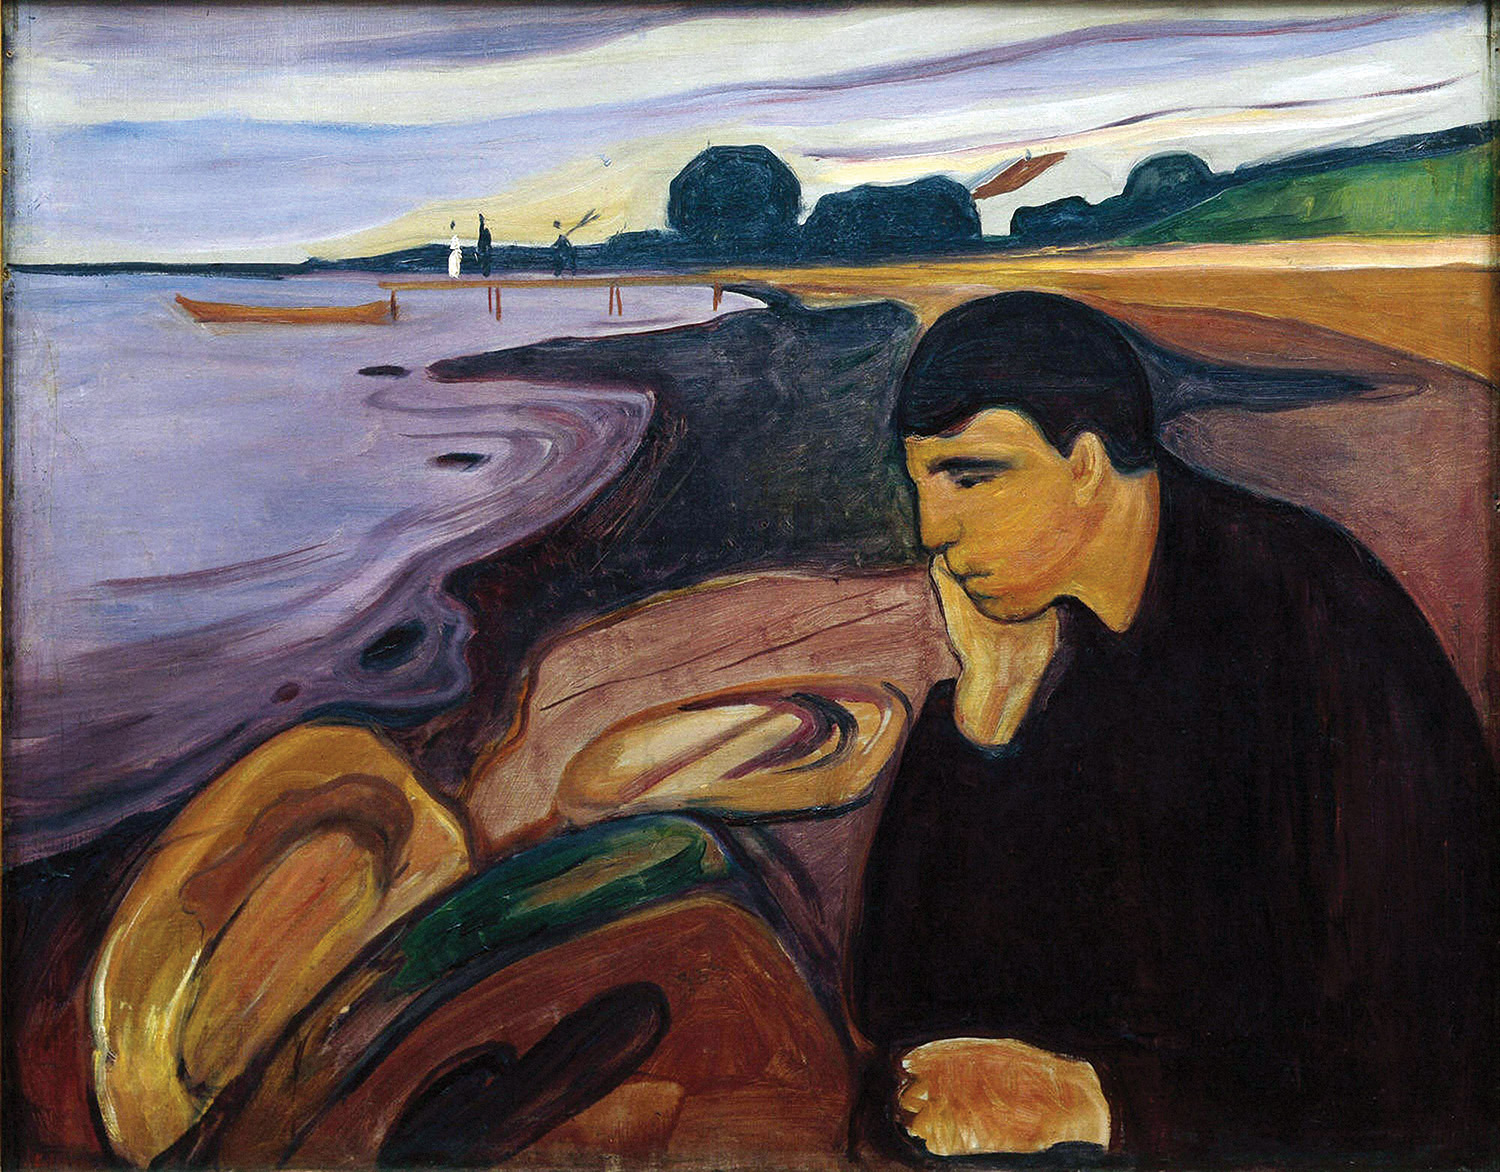 A detail from Edward Munch’s painting Melancholia. A person sitting on a beach. Curvy blobs of purple, blue, black, and beige mix together to serve as the water meeting the land and sky, as well as nebulous shapes surrounding the person and filling the canvas. They stare down at the water.